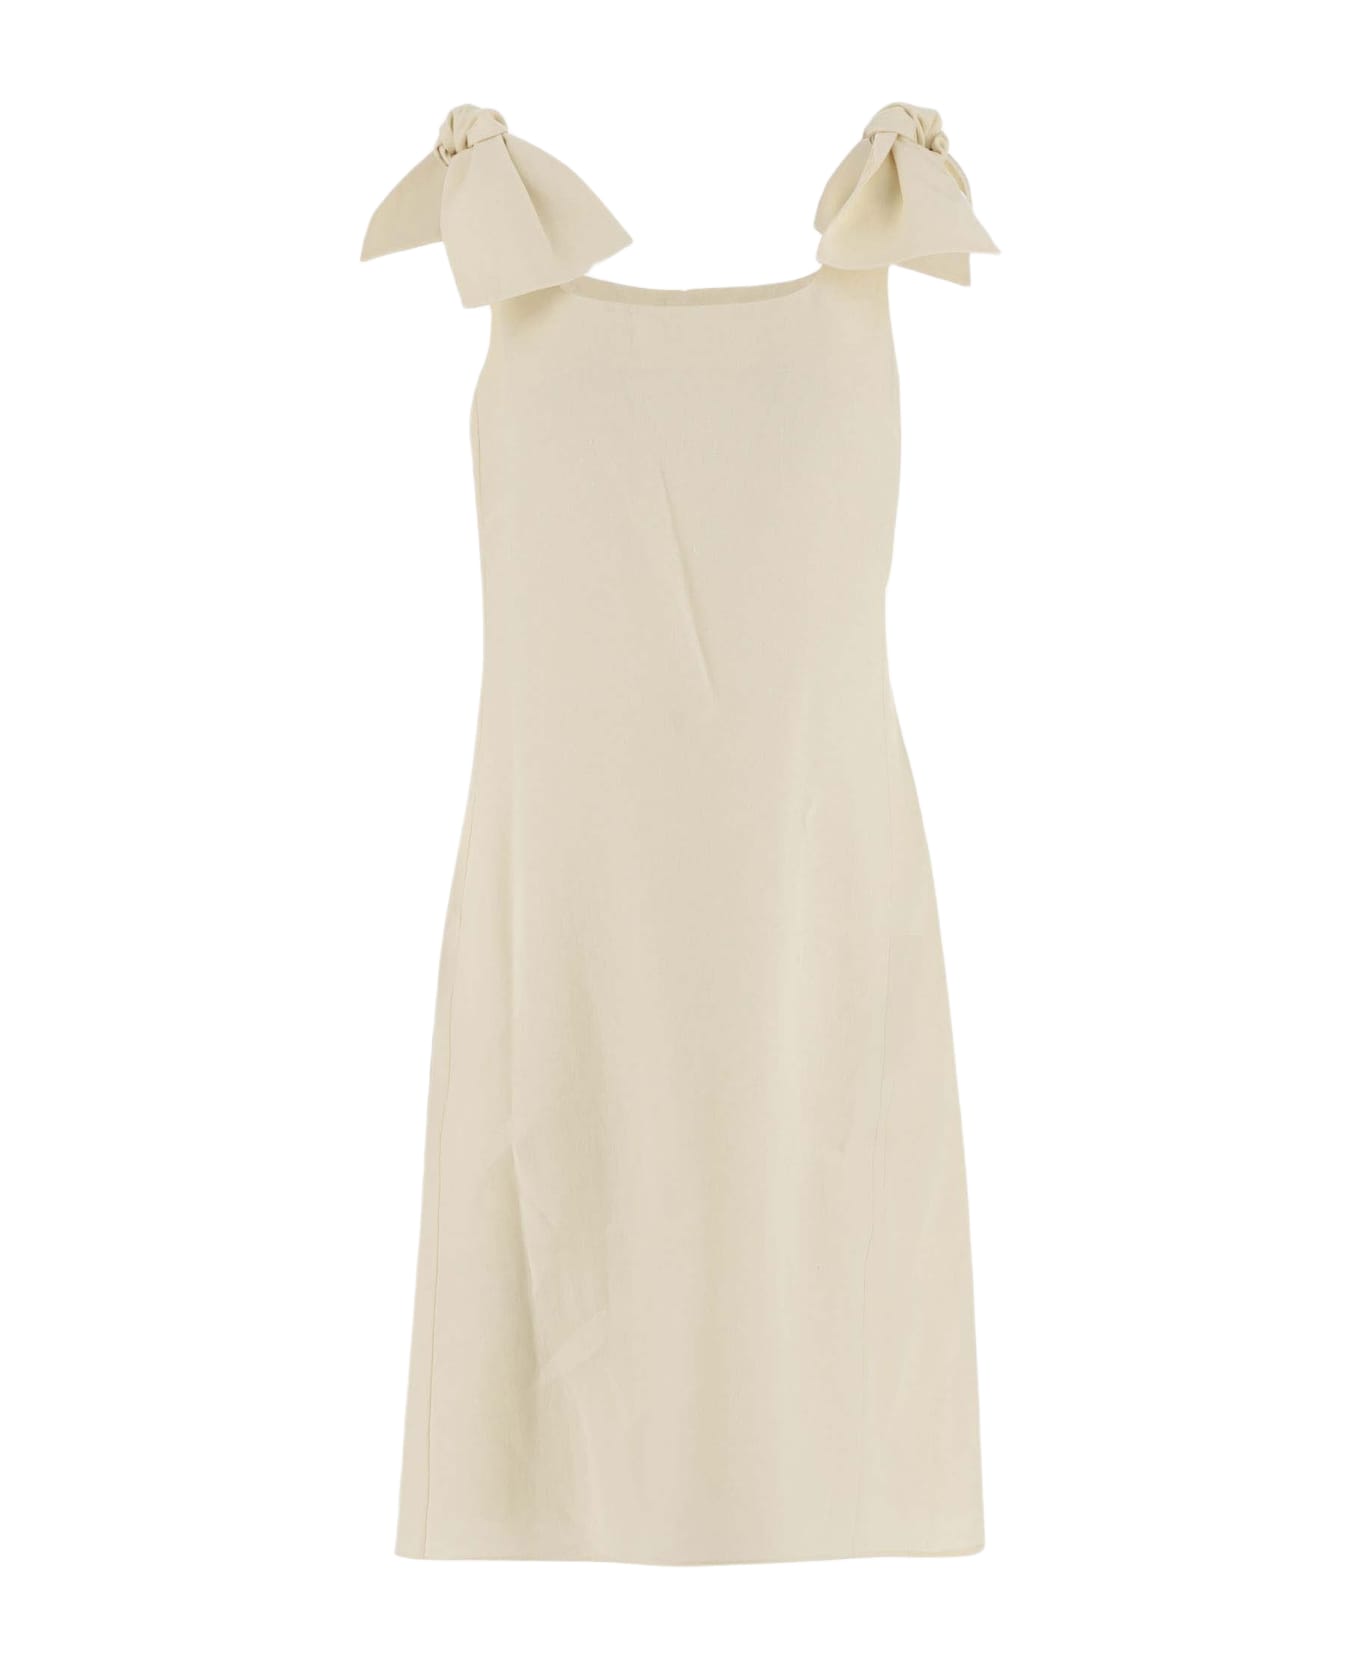 Chloé Linen Dress With Bows - Ivory